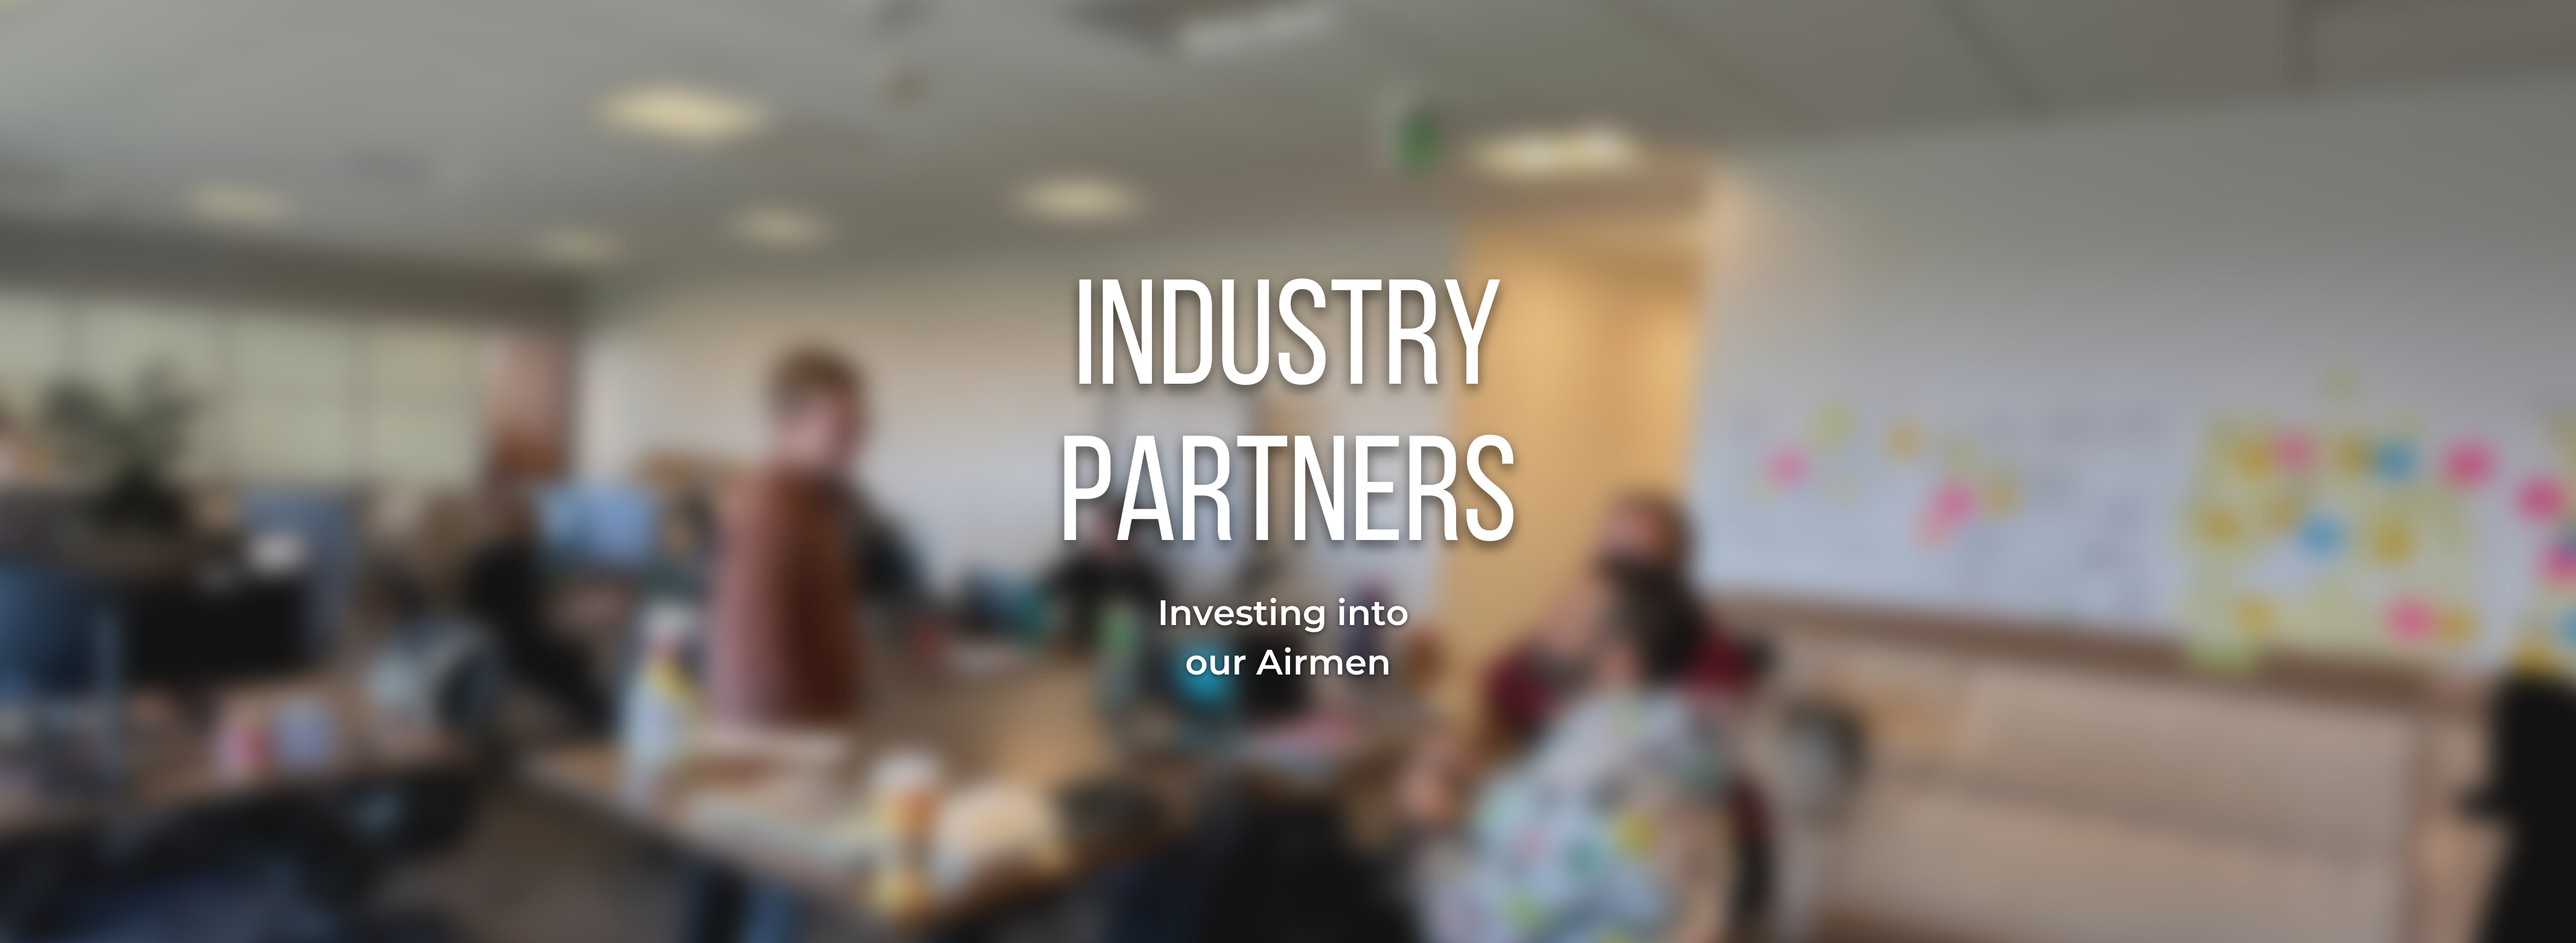 Industry Partners Page Banner2